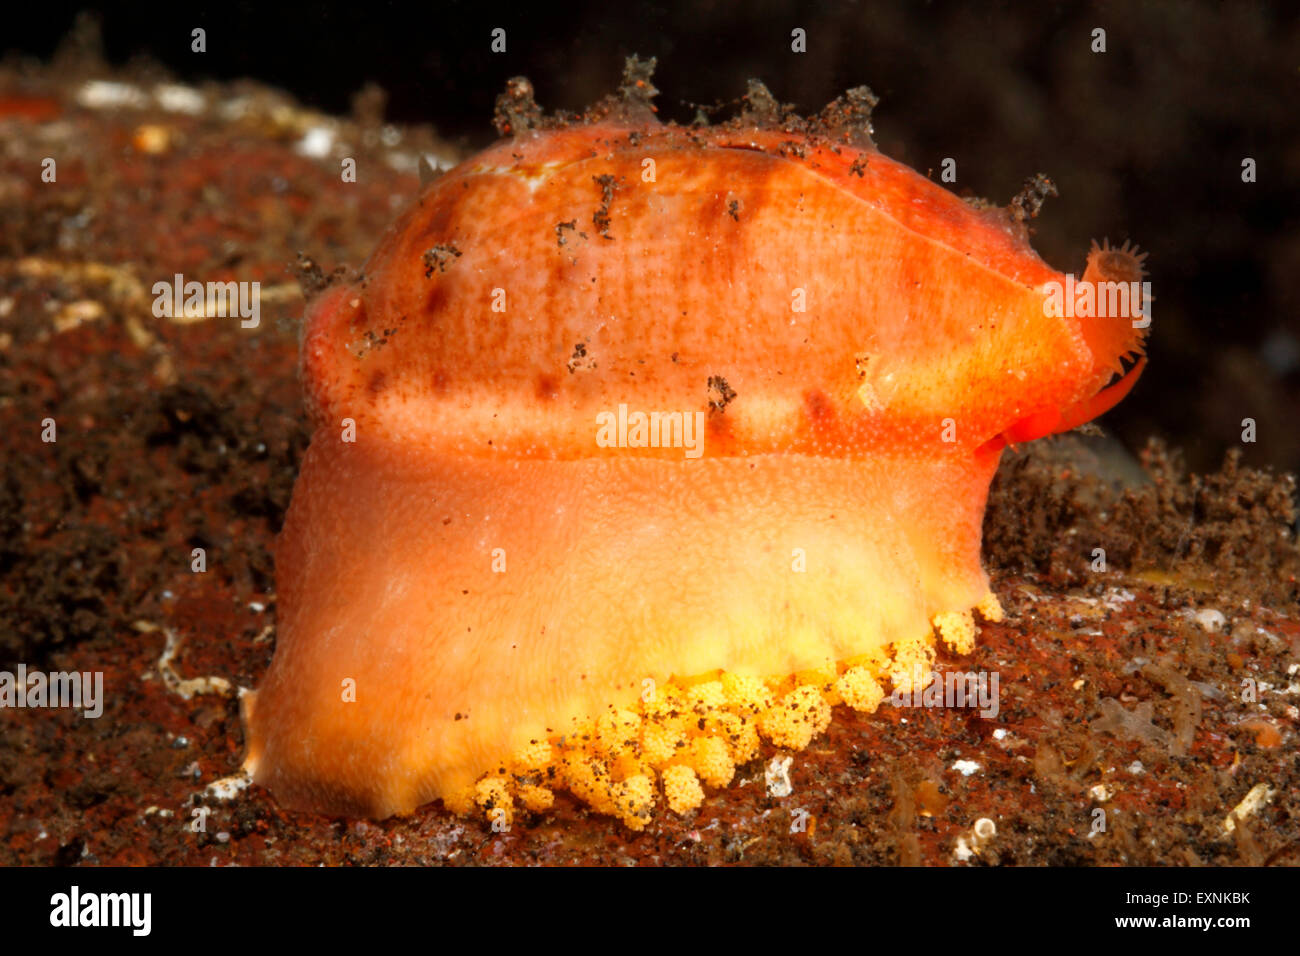 Tapering Cowry or Cowrie shell, Talostolida teres. May also be Pellucens Cowry, or Cowrie Talostolida pellucens, sitting on her yellow eggs. Stock Photo